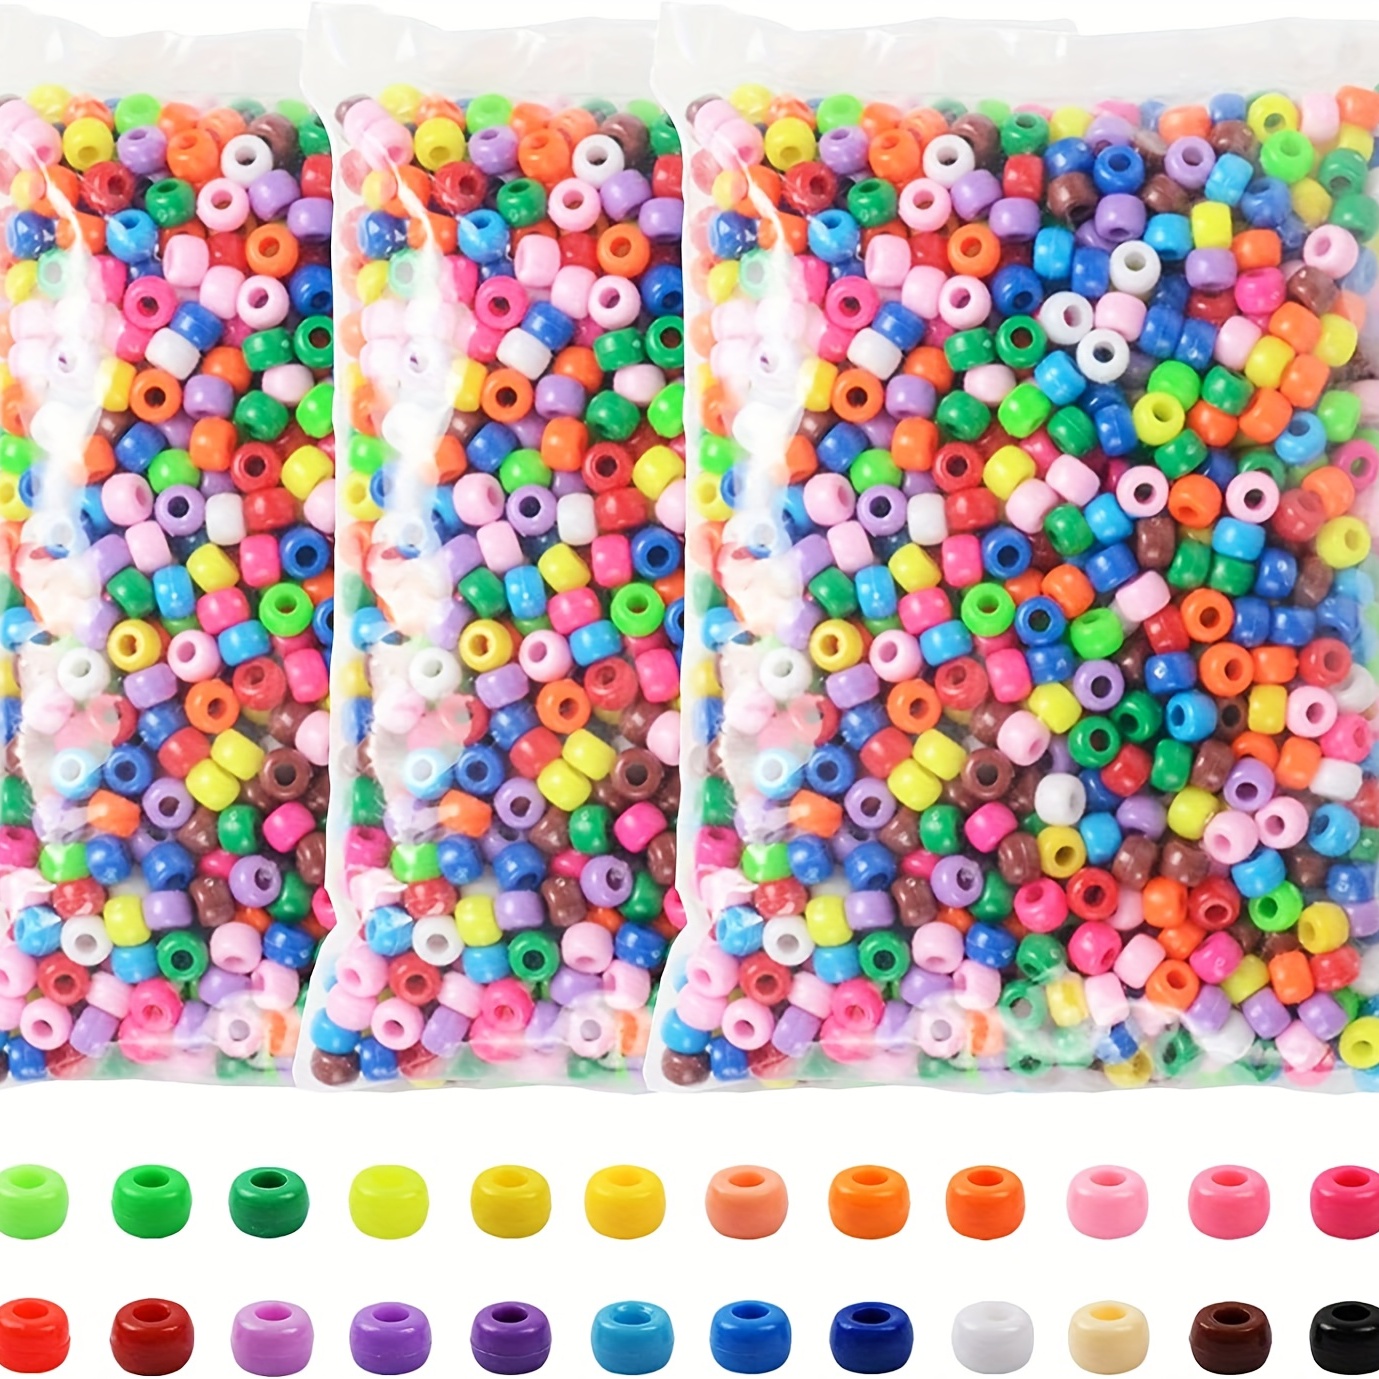 

300/600/900/1000pcs 6x9mm Multi-colored Plastic Craft Beads Set, 24 Assorted Colors For Diy Crafting Jewelry Making